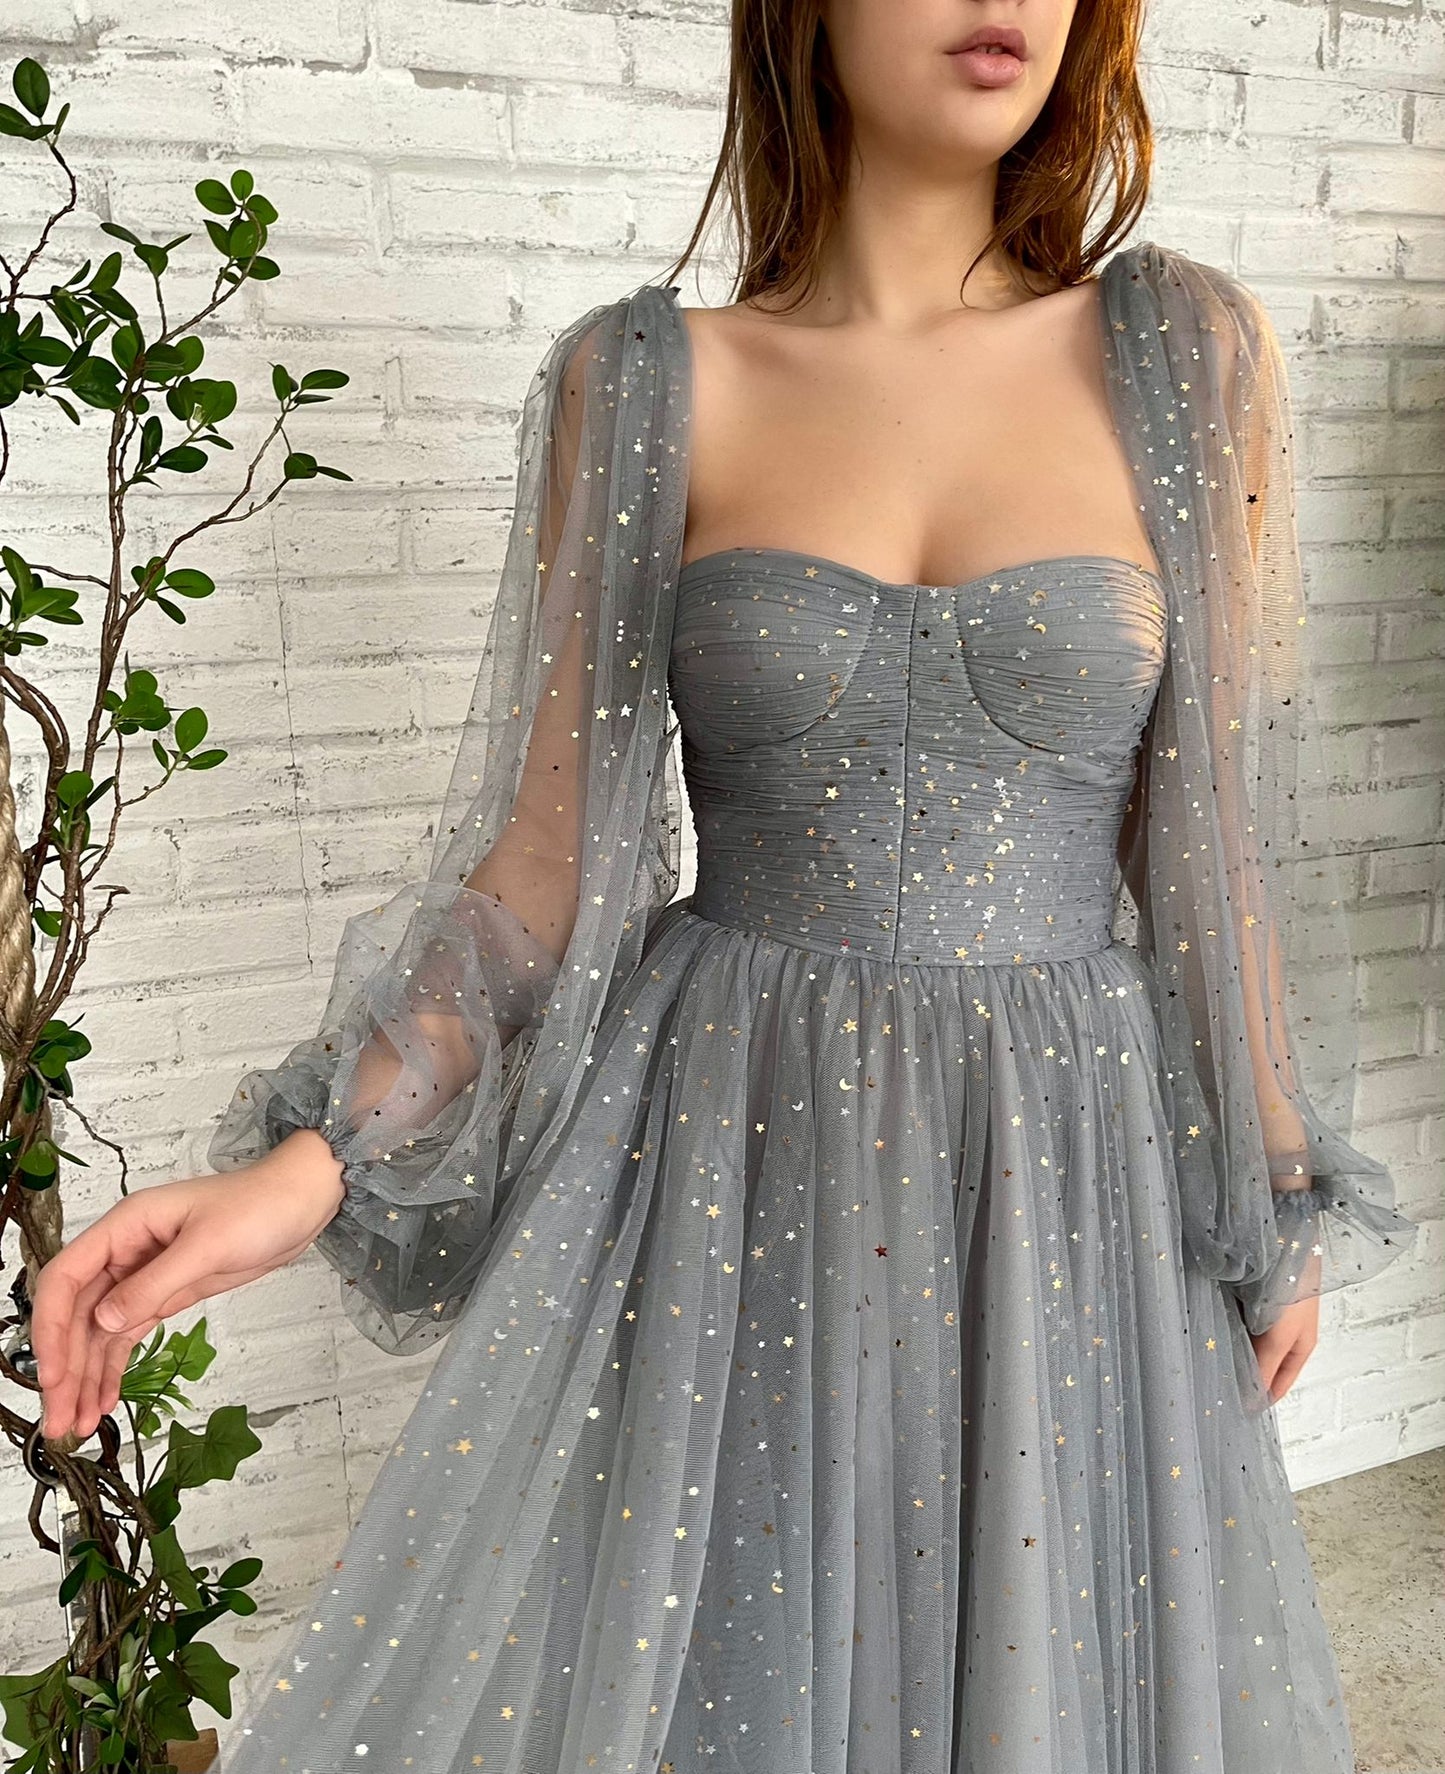 Grey midi dress with starry fabric and cape